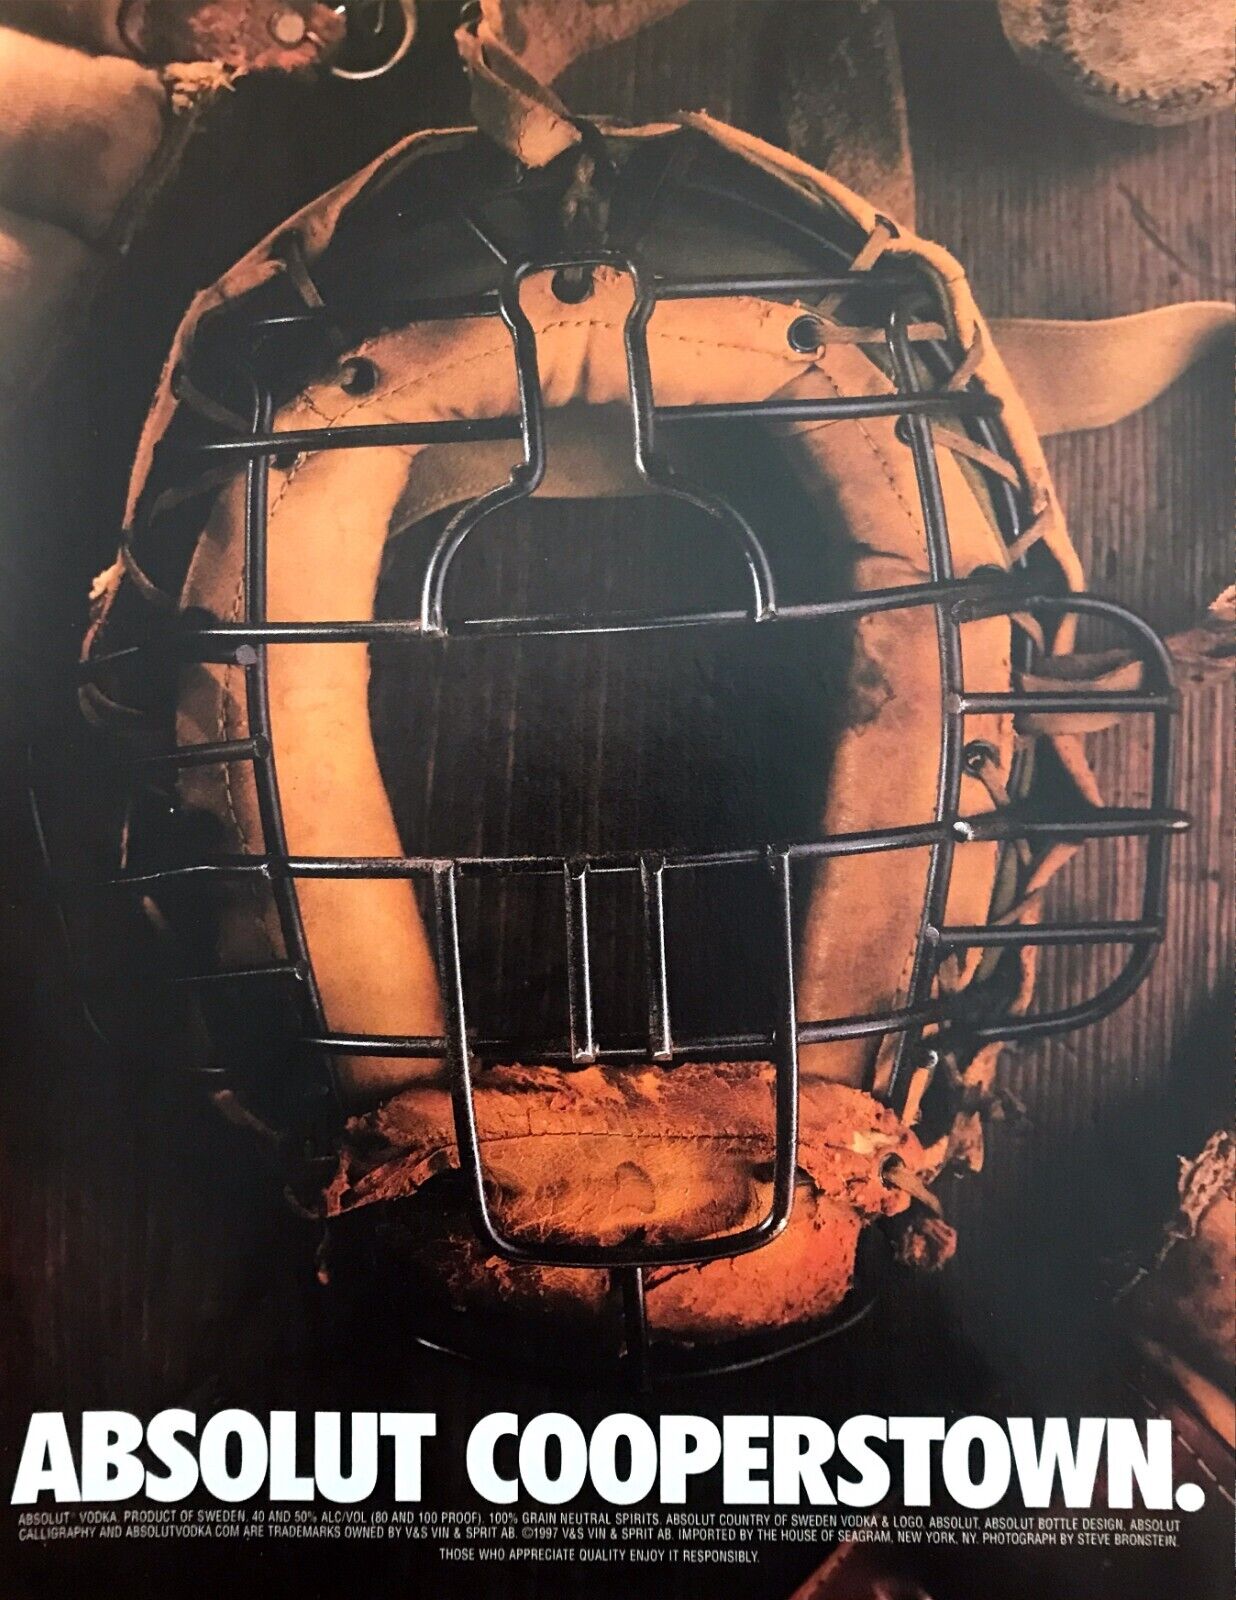 1997 Absolut Cooperstown Catchers Mask photo Absolut Vodka vintage print ad